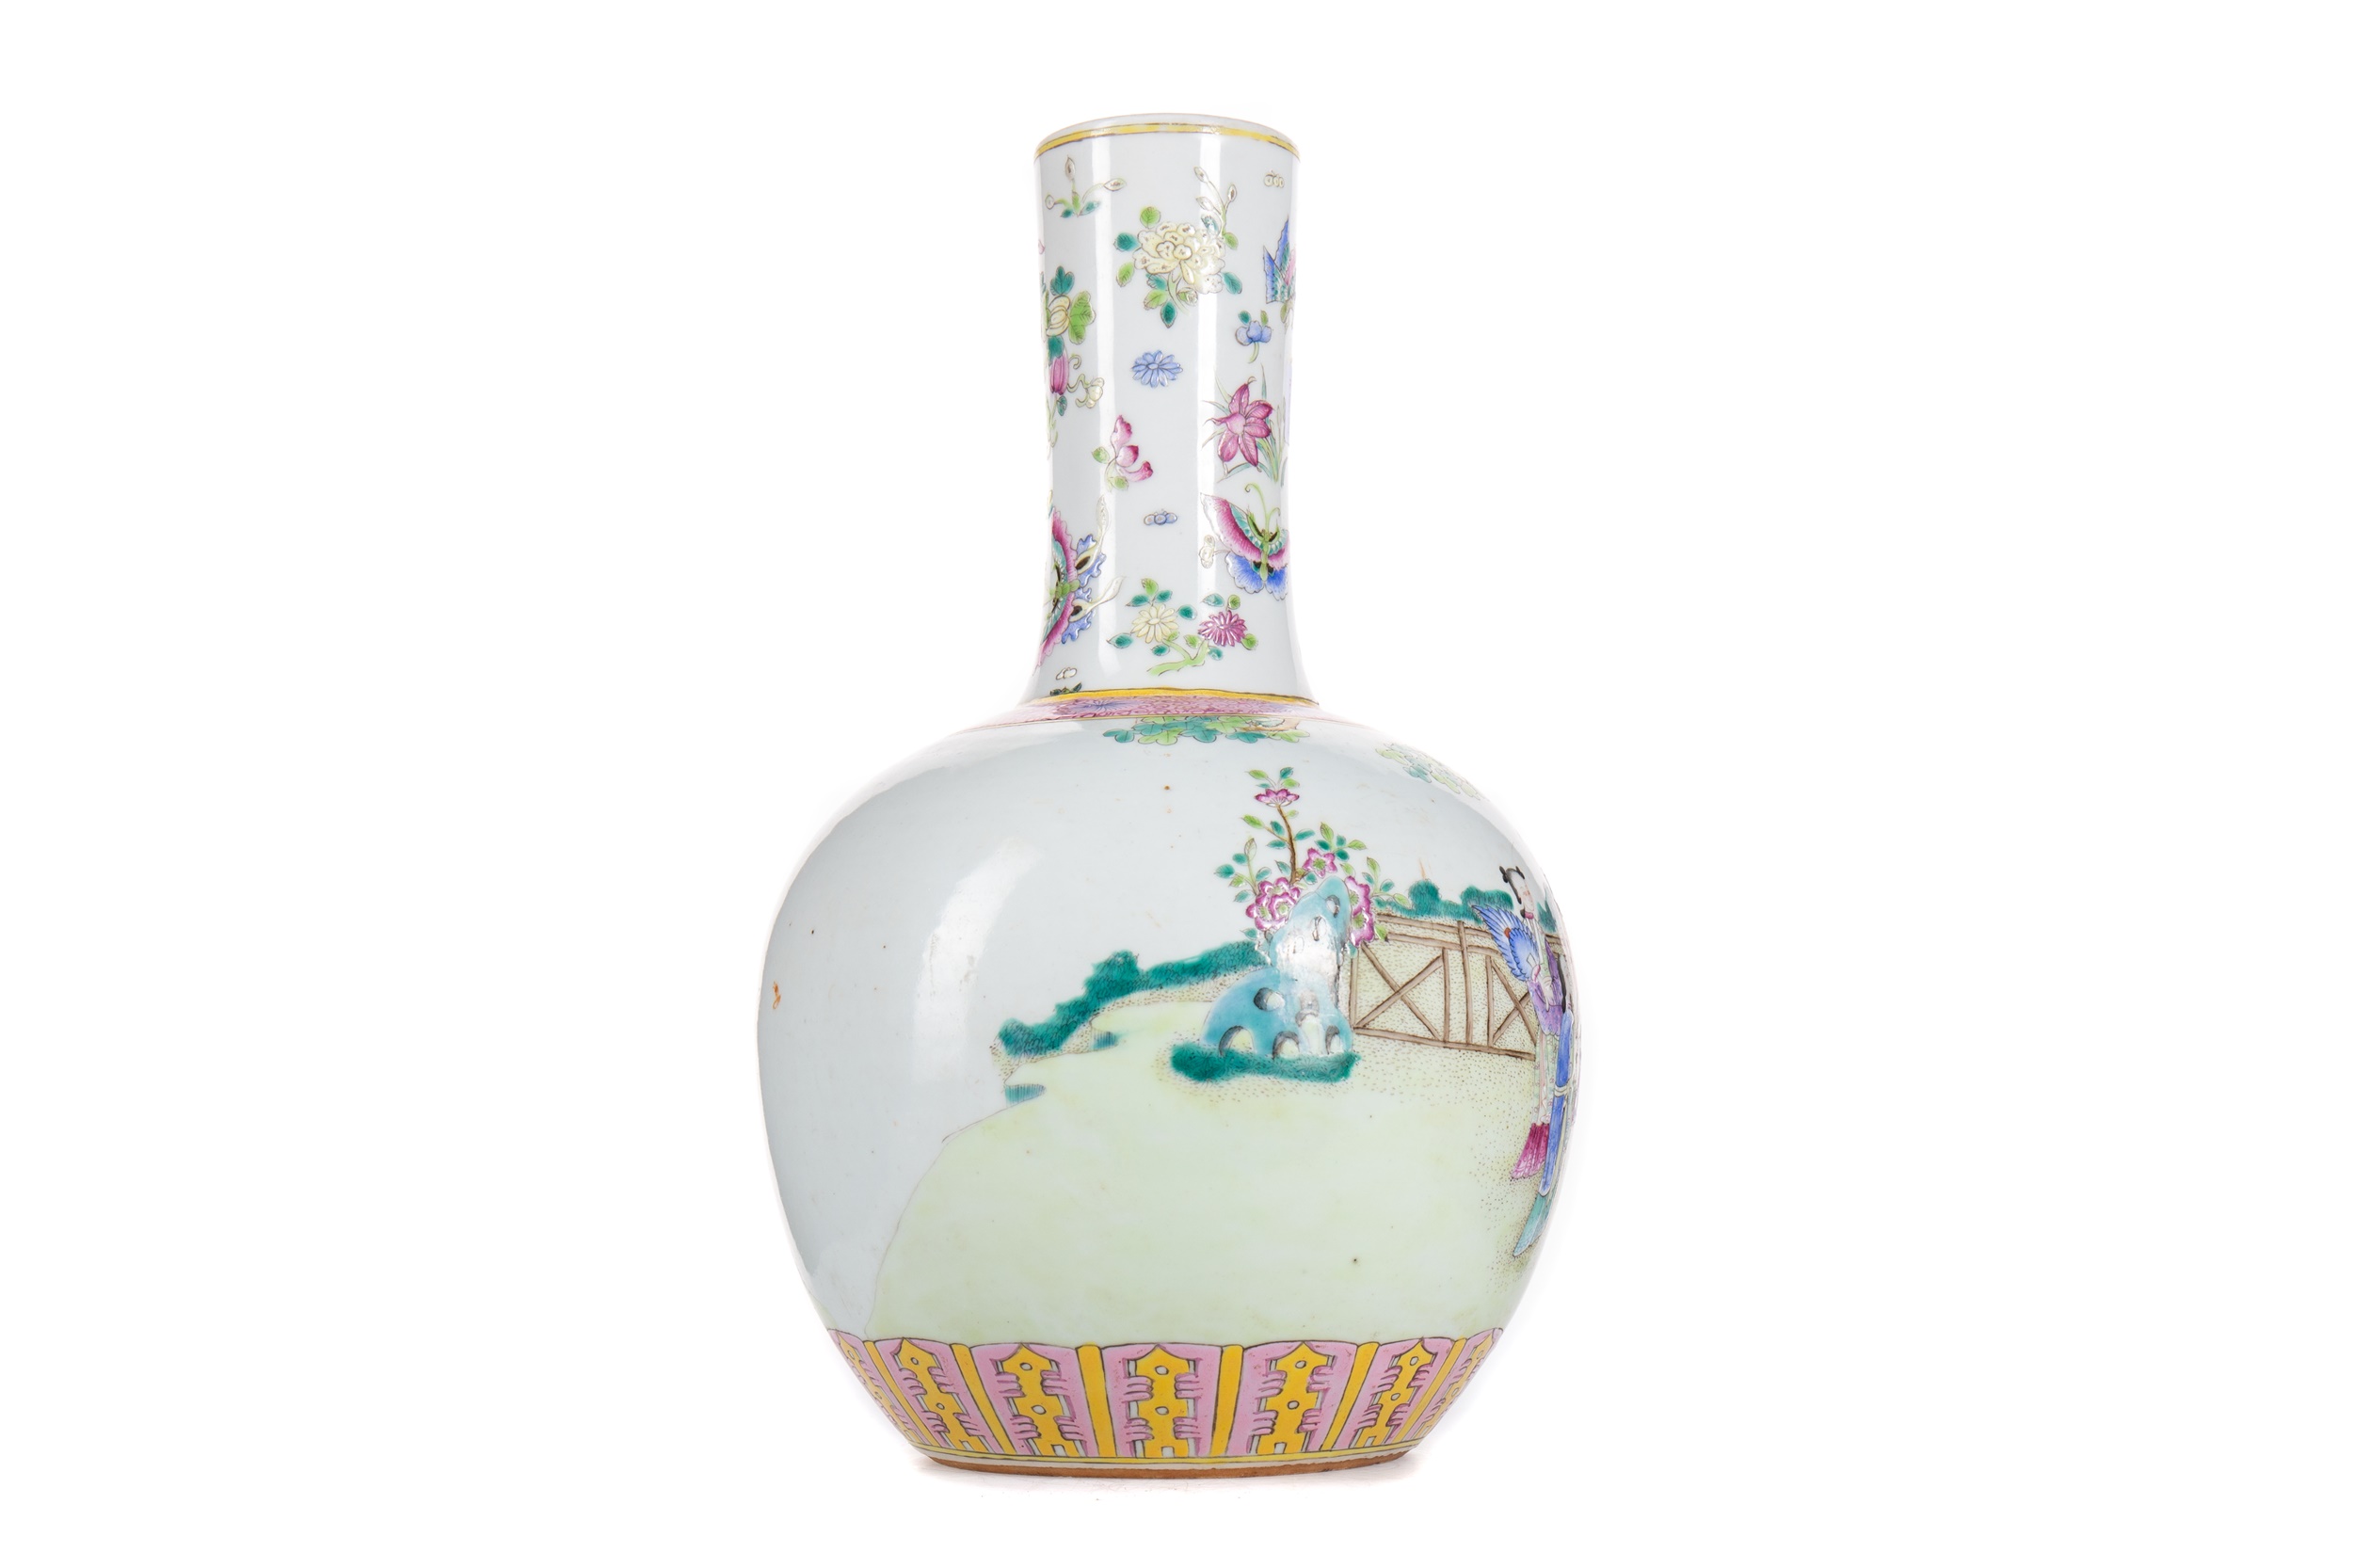 CHINESE BOTTLE VASE2 LATE19TH/EARLY 20TH CENTURY - Image 2 of 2